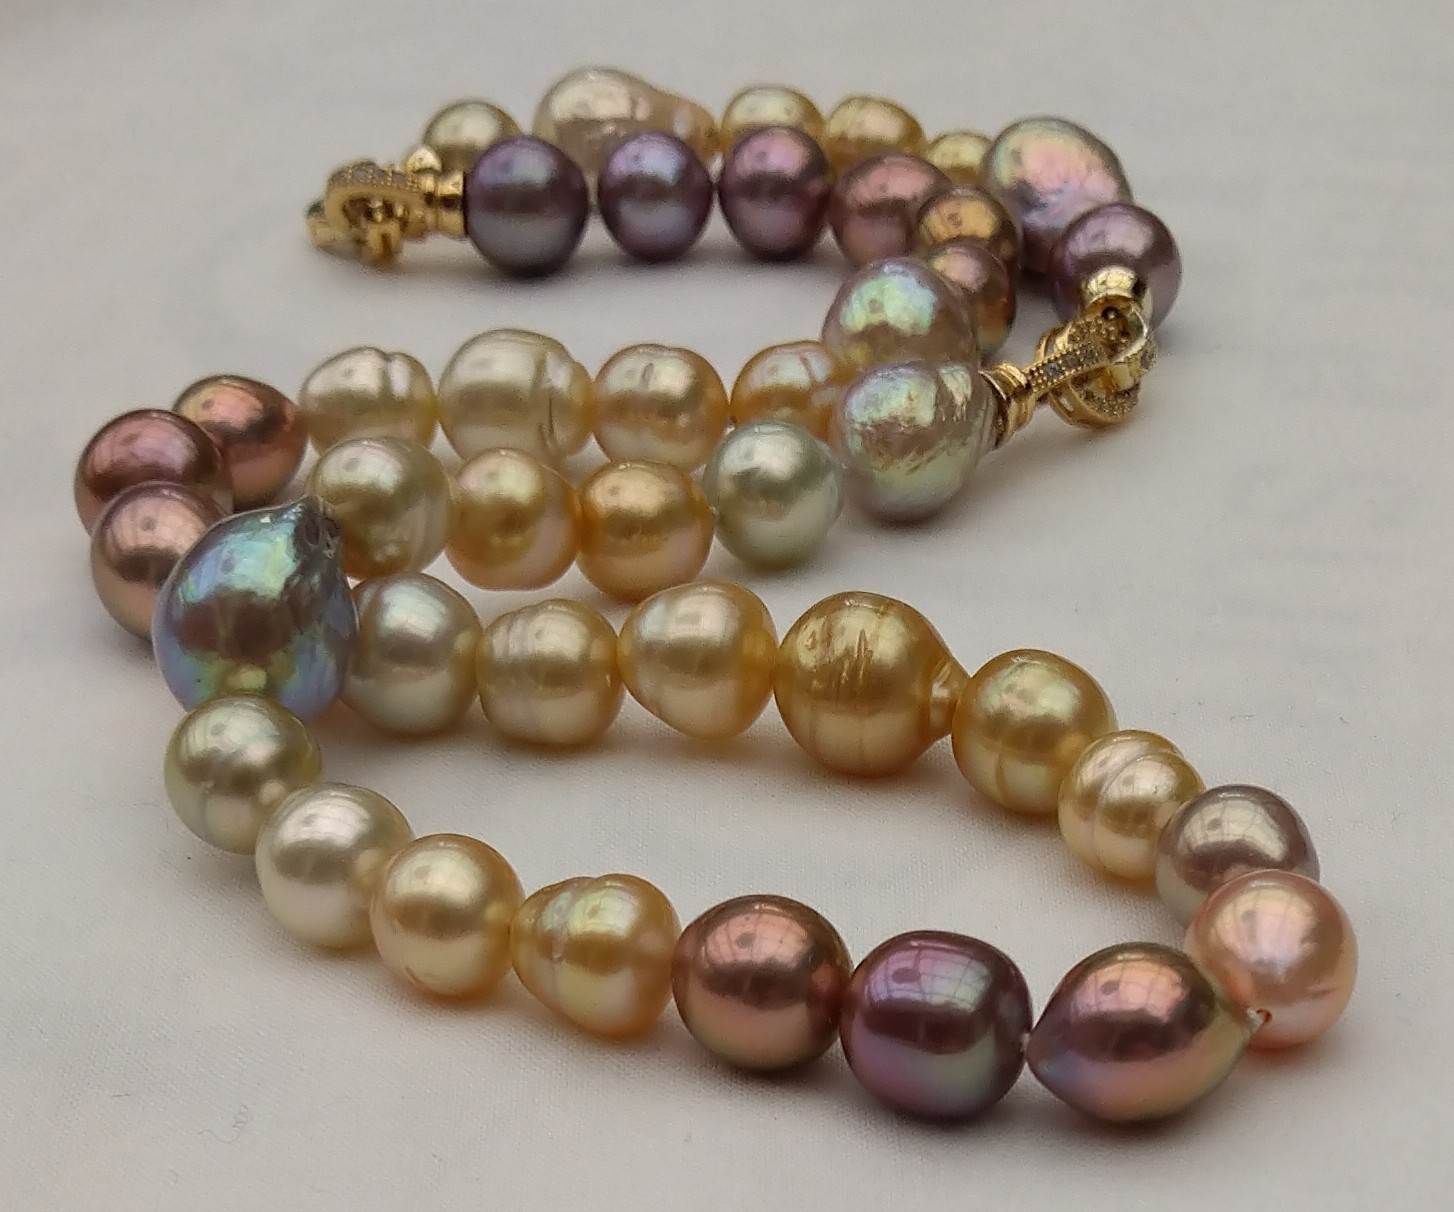 made with pearls from Druzydesign, with a few from Pearlescence, cmw pearls and Kongspearl.